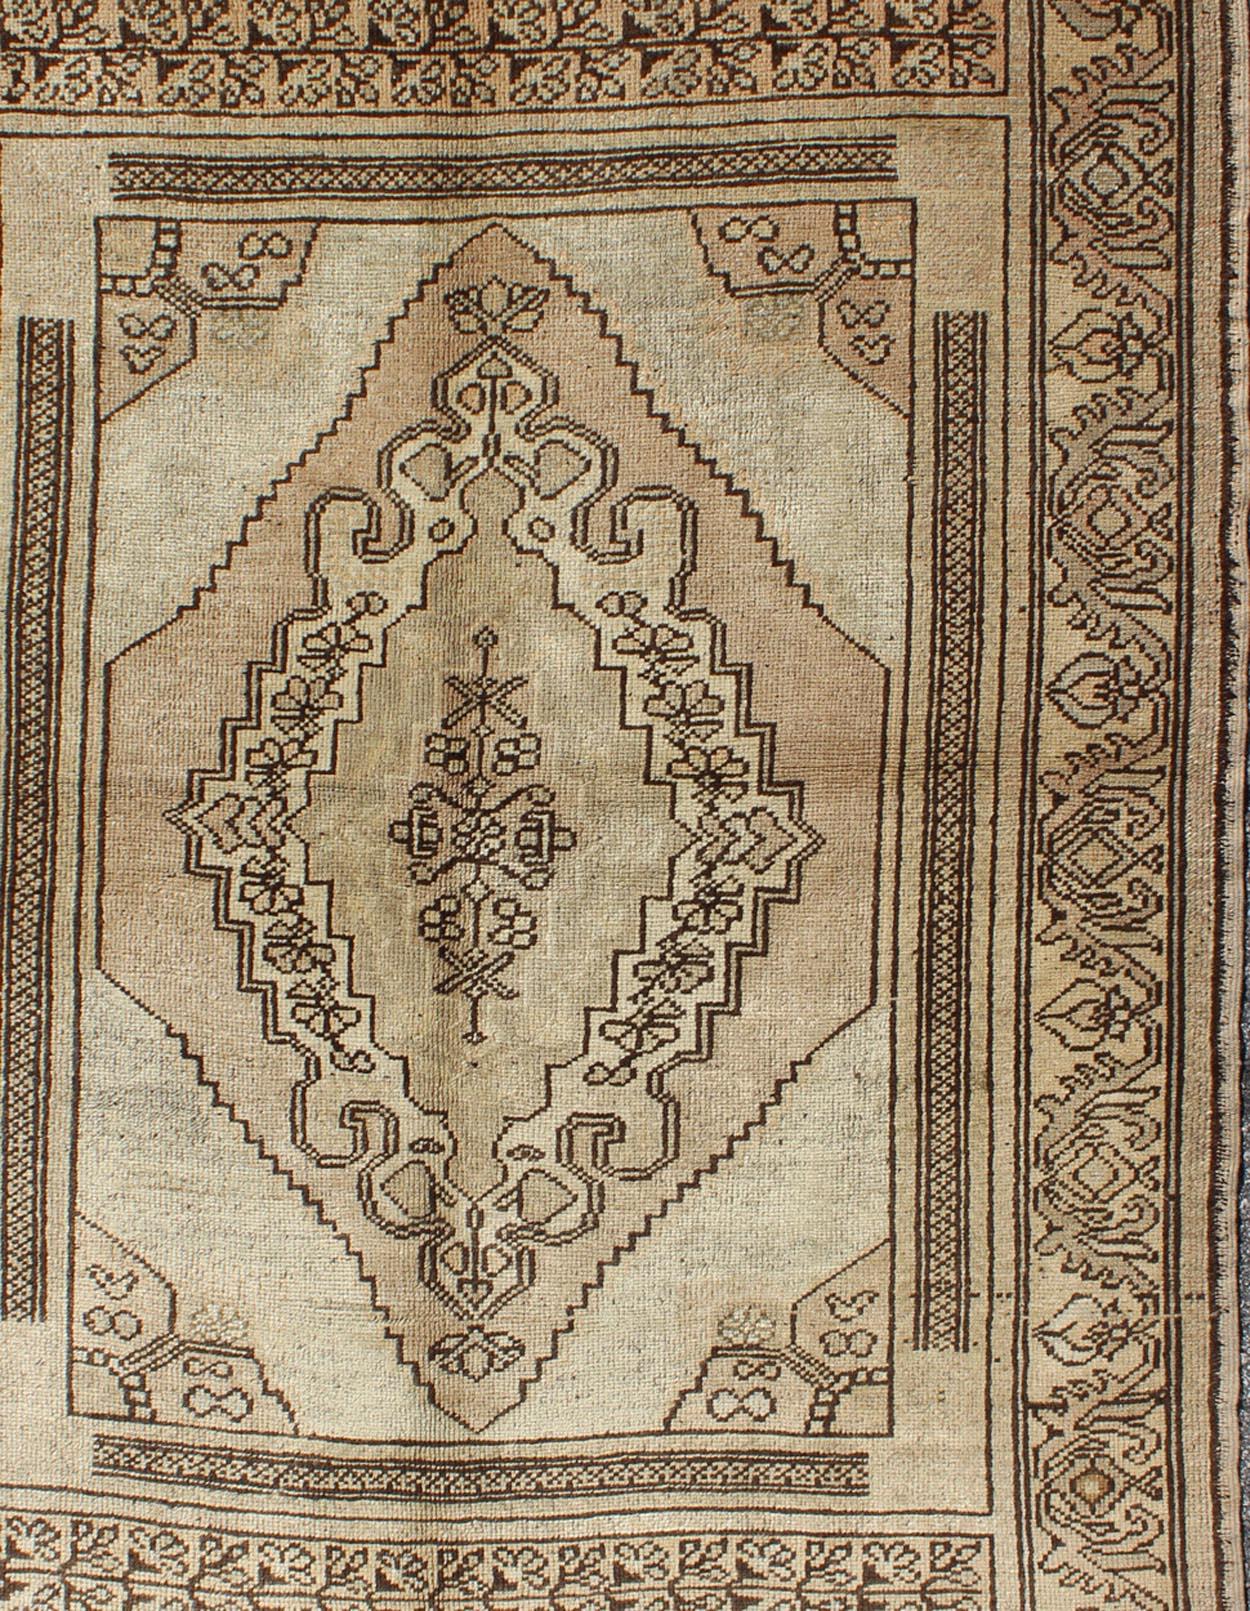 Measures 4 x 5'7

This oushak rug features an intricately beautiful design. The central medallion is complemented by a defining border featuring a symmetrical set of geometric floral motifs. The various shades of brown, cream, and tan blend